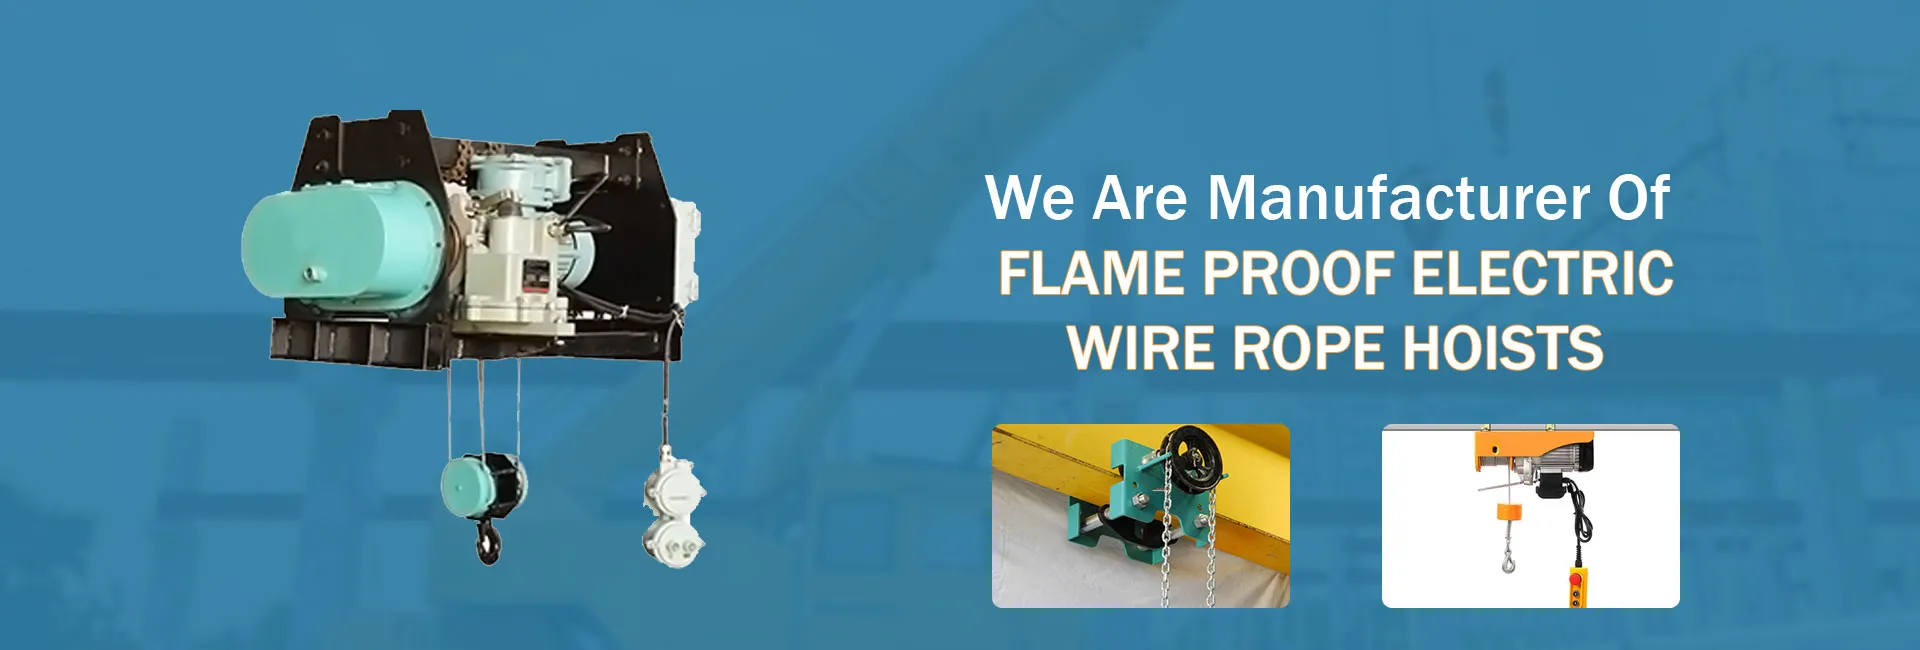 Flame Proof Electric Wire Rope Hoist, Manufacturer, Suppliers